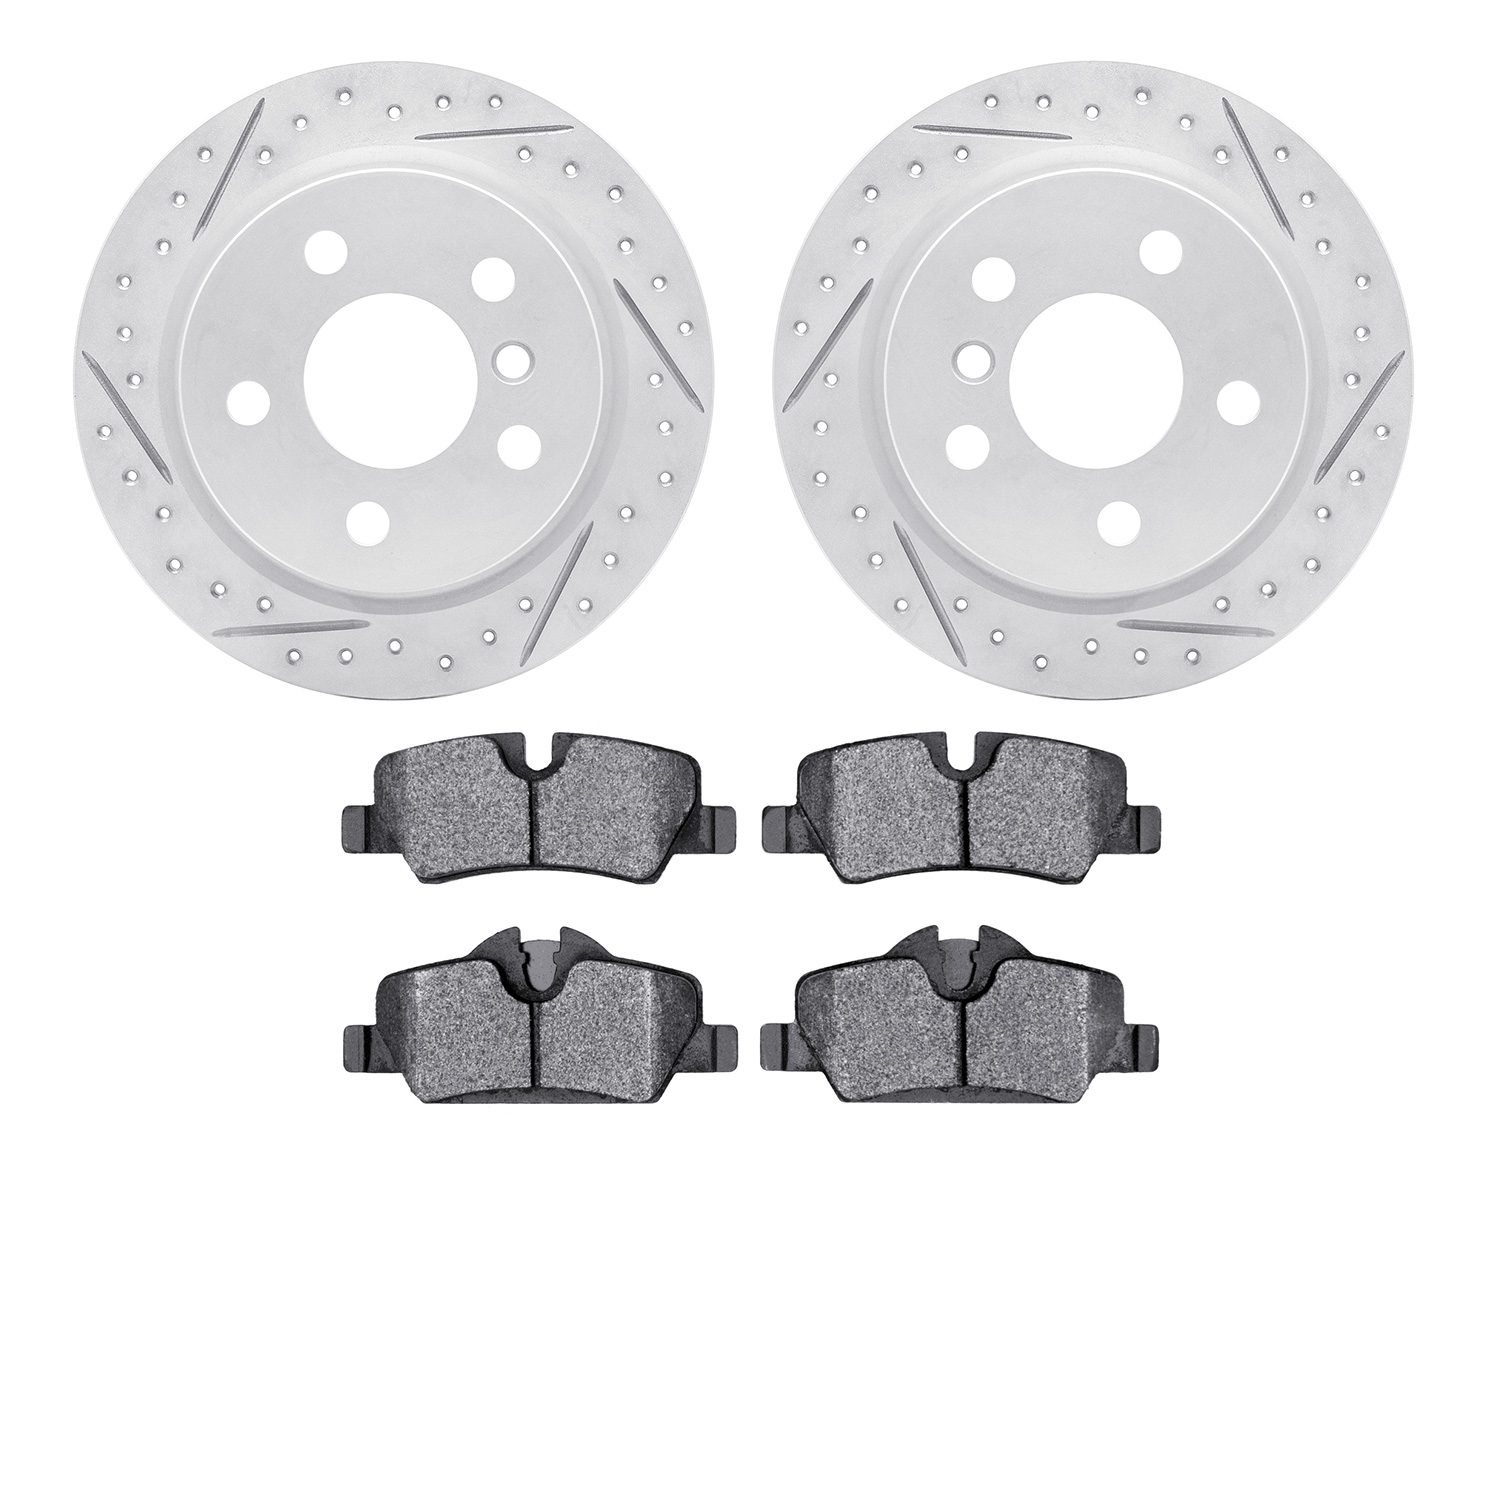 2502-32019 Geoperformance Drilled/Slotted Rotors w/5000 Advanced Brake Pads Kit, Fits Select Mini, Position: Rear